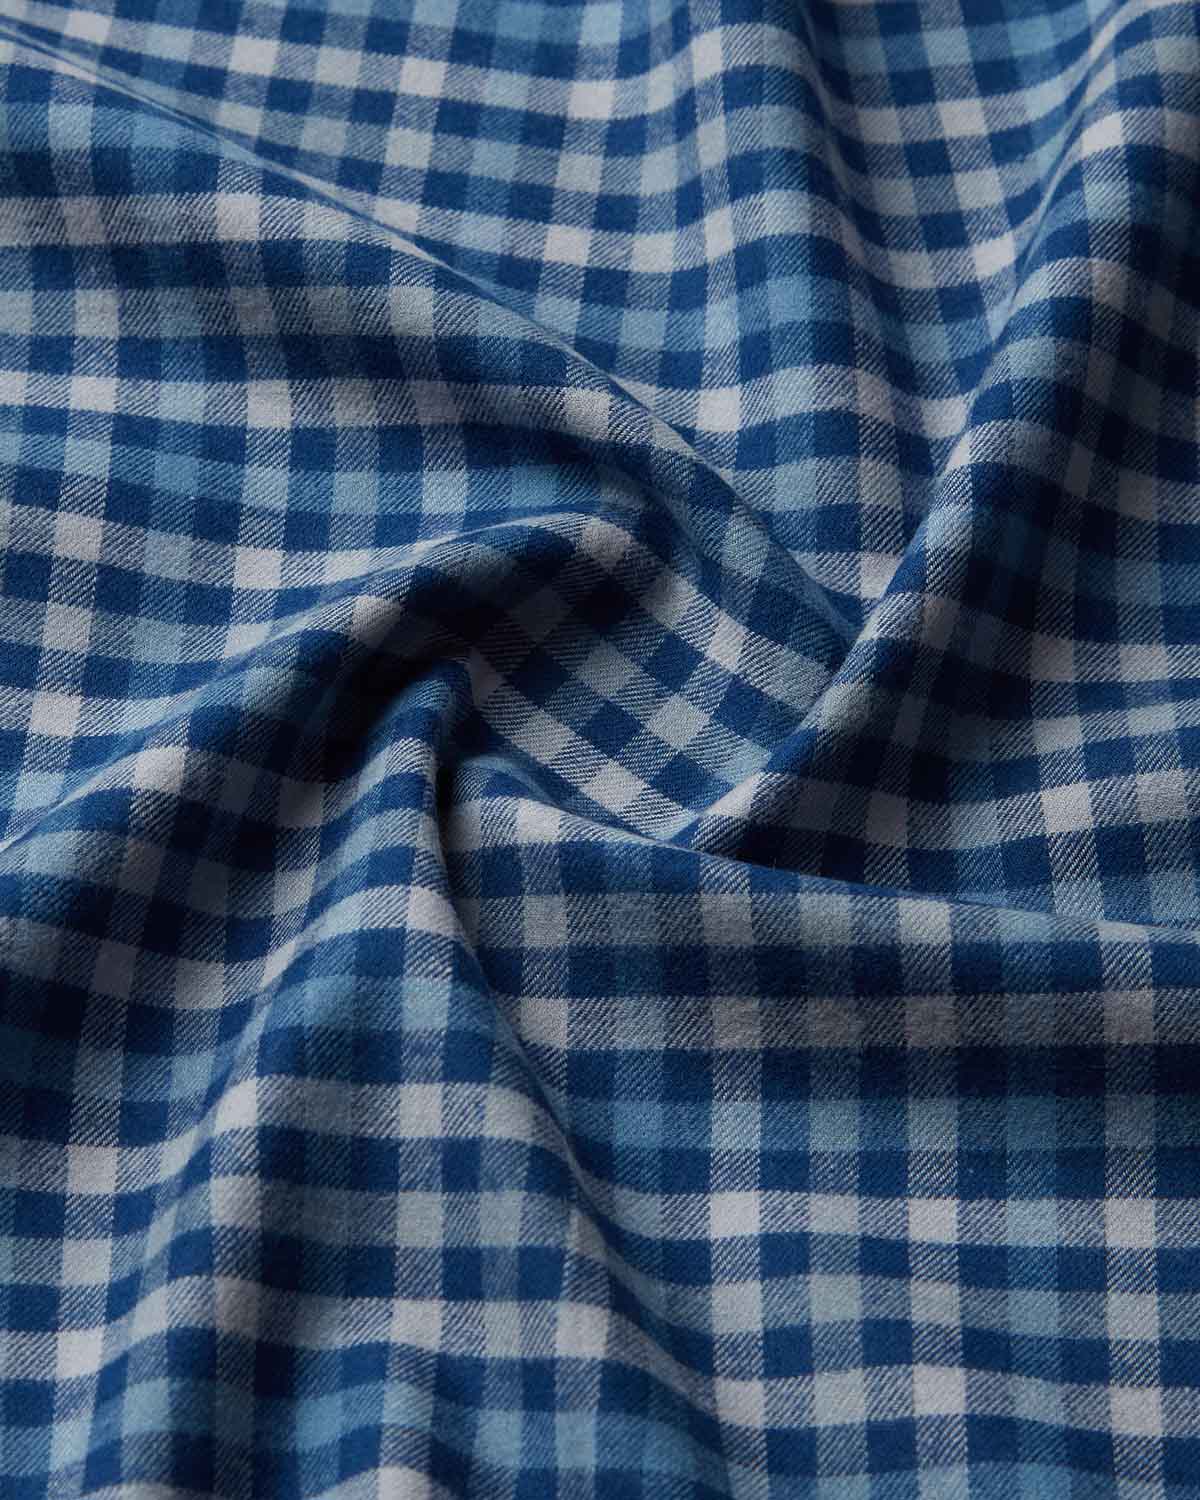 Bombay Shirt Company - Gentian Flannel Checked Shirt